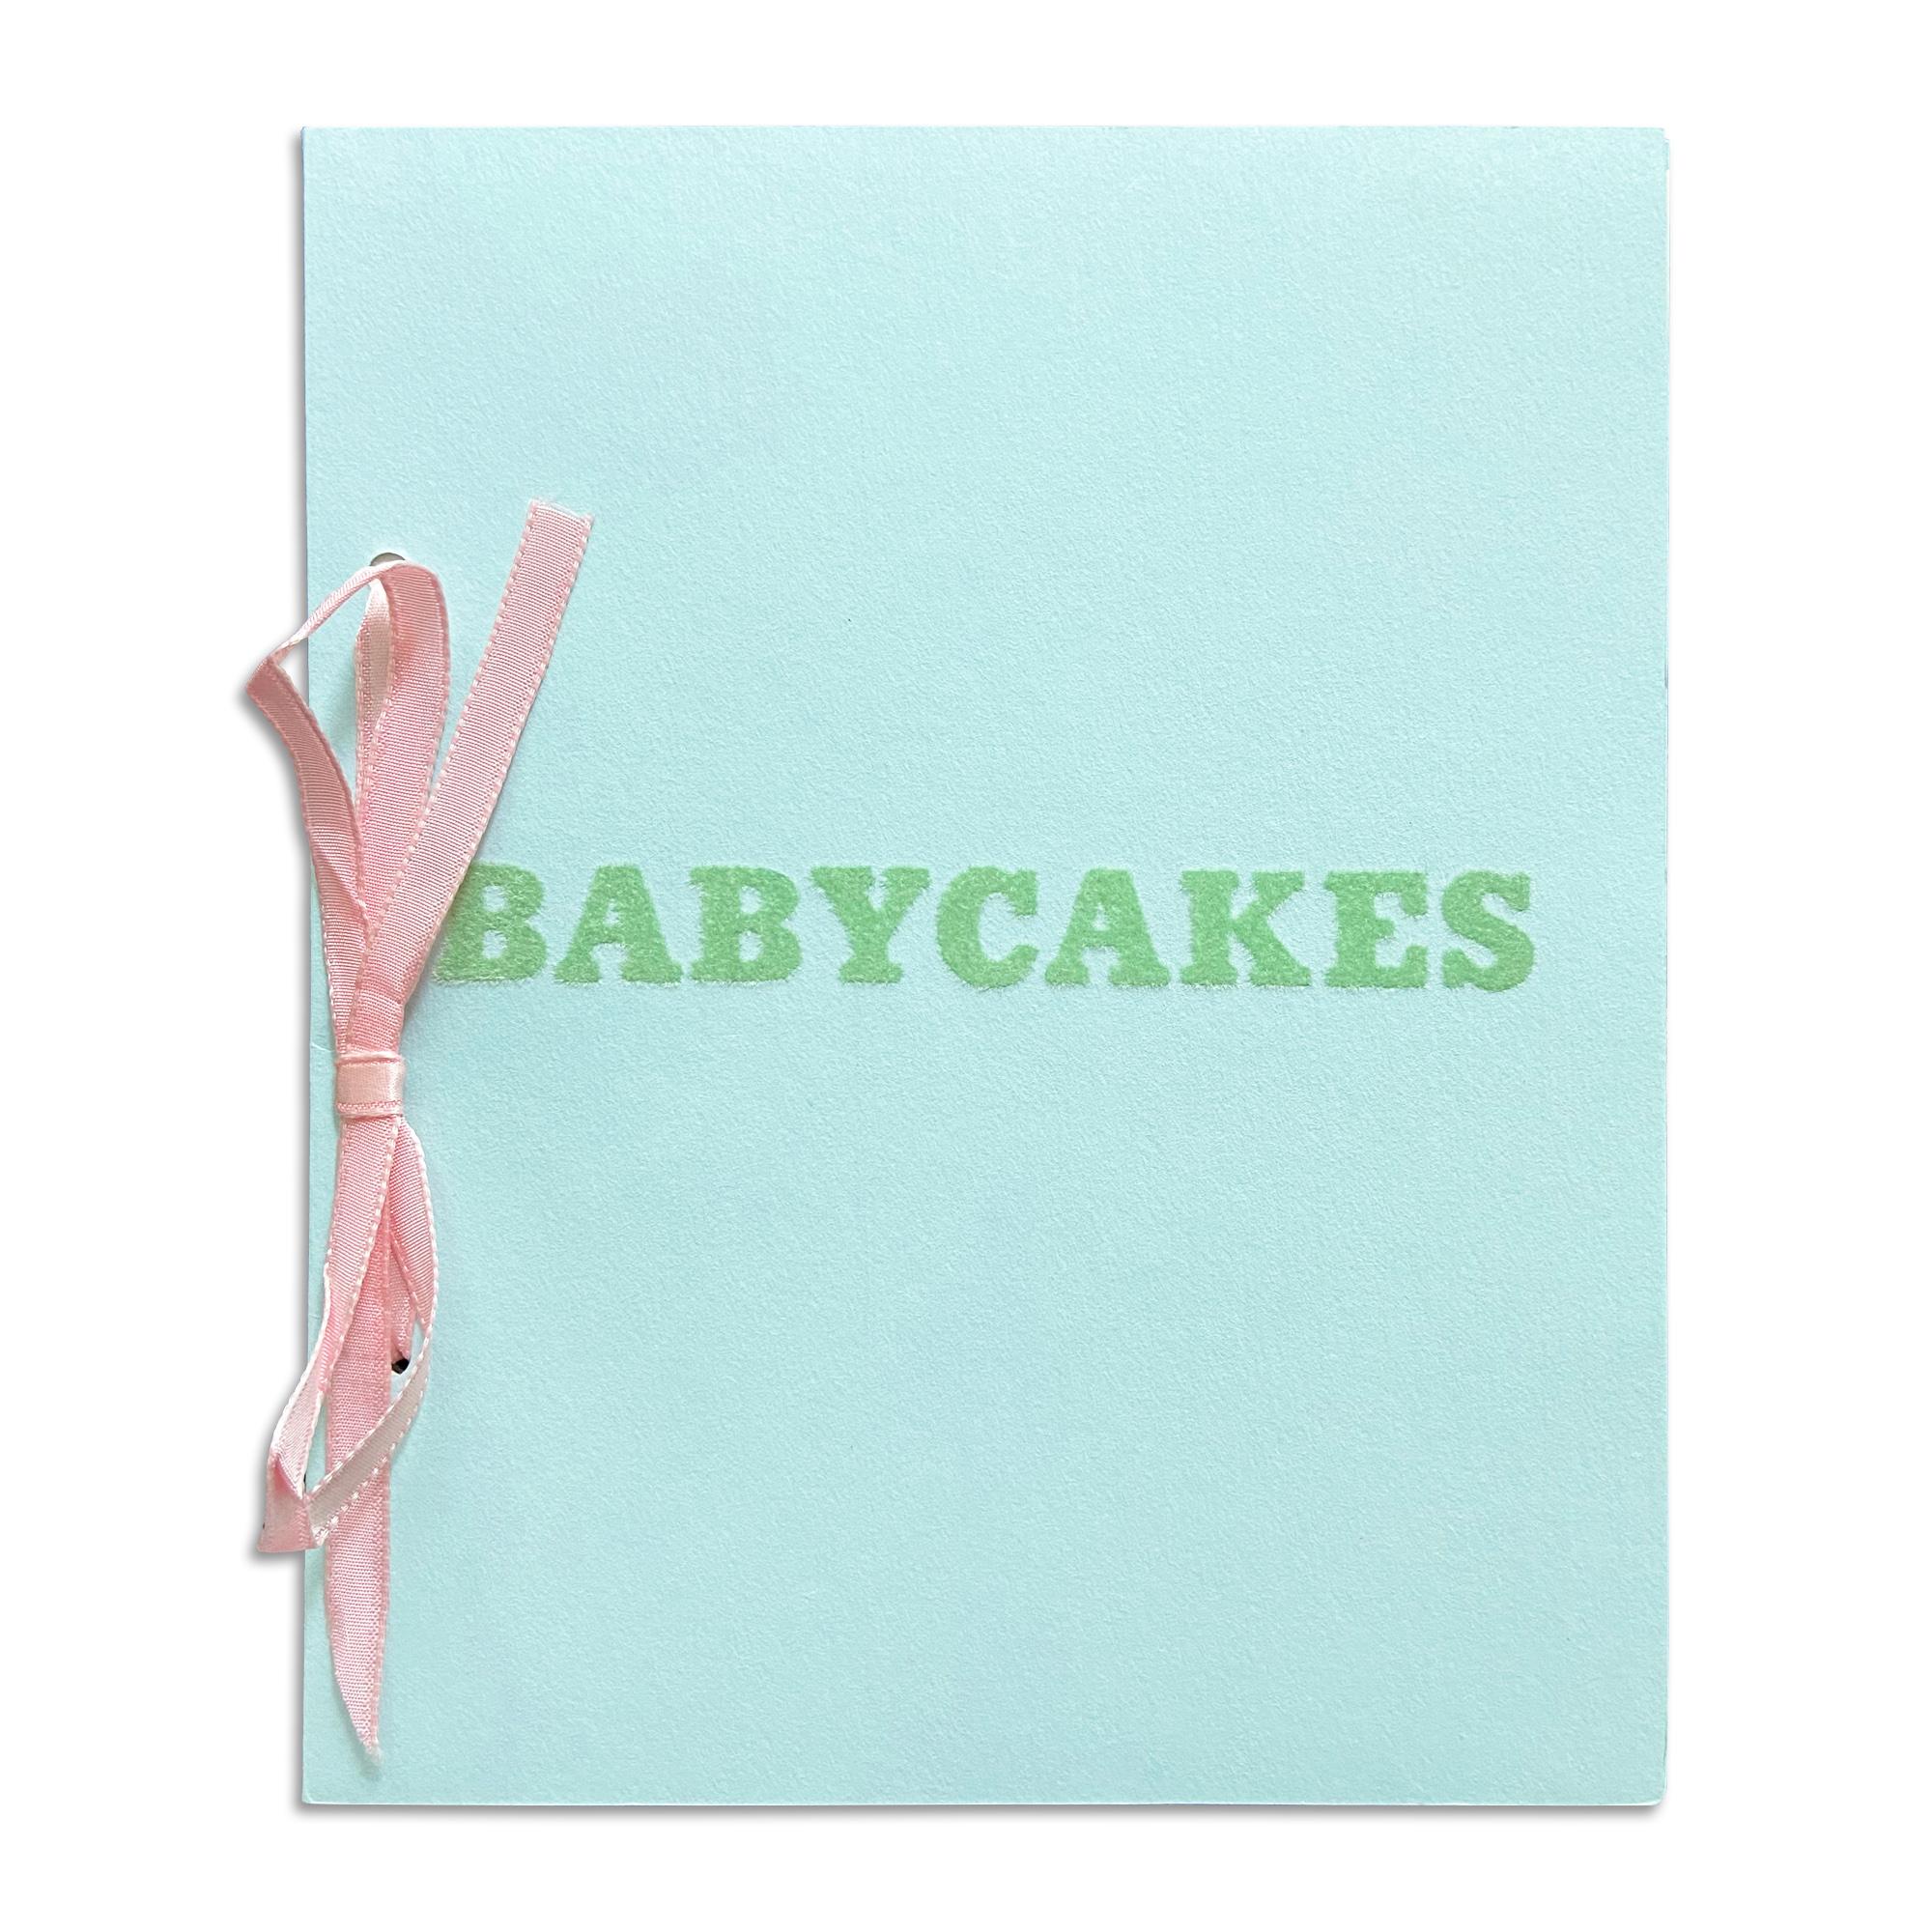 Ed Ruscha (American, b. 1937)
Babycakes with Weigths, 1970
Medium: Artist's book, offset printed (white paper, blue paper with green flocking, pink satin ribbon)
Dimensions: 19 × 15.2 × 0.5 cm (7 1/2 × 6 × 3/16 in) 
Publisher: Multiples, Inc., New